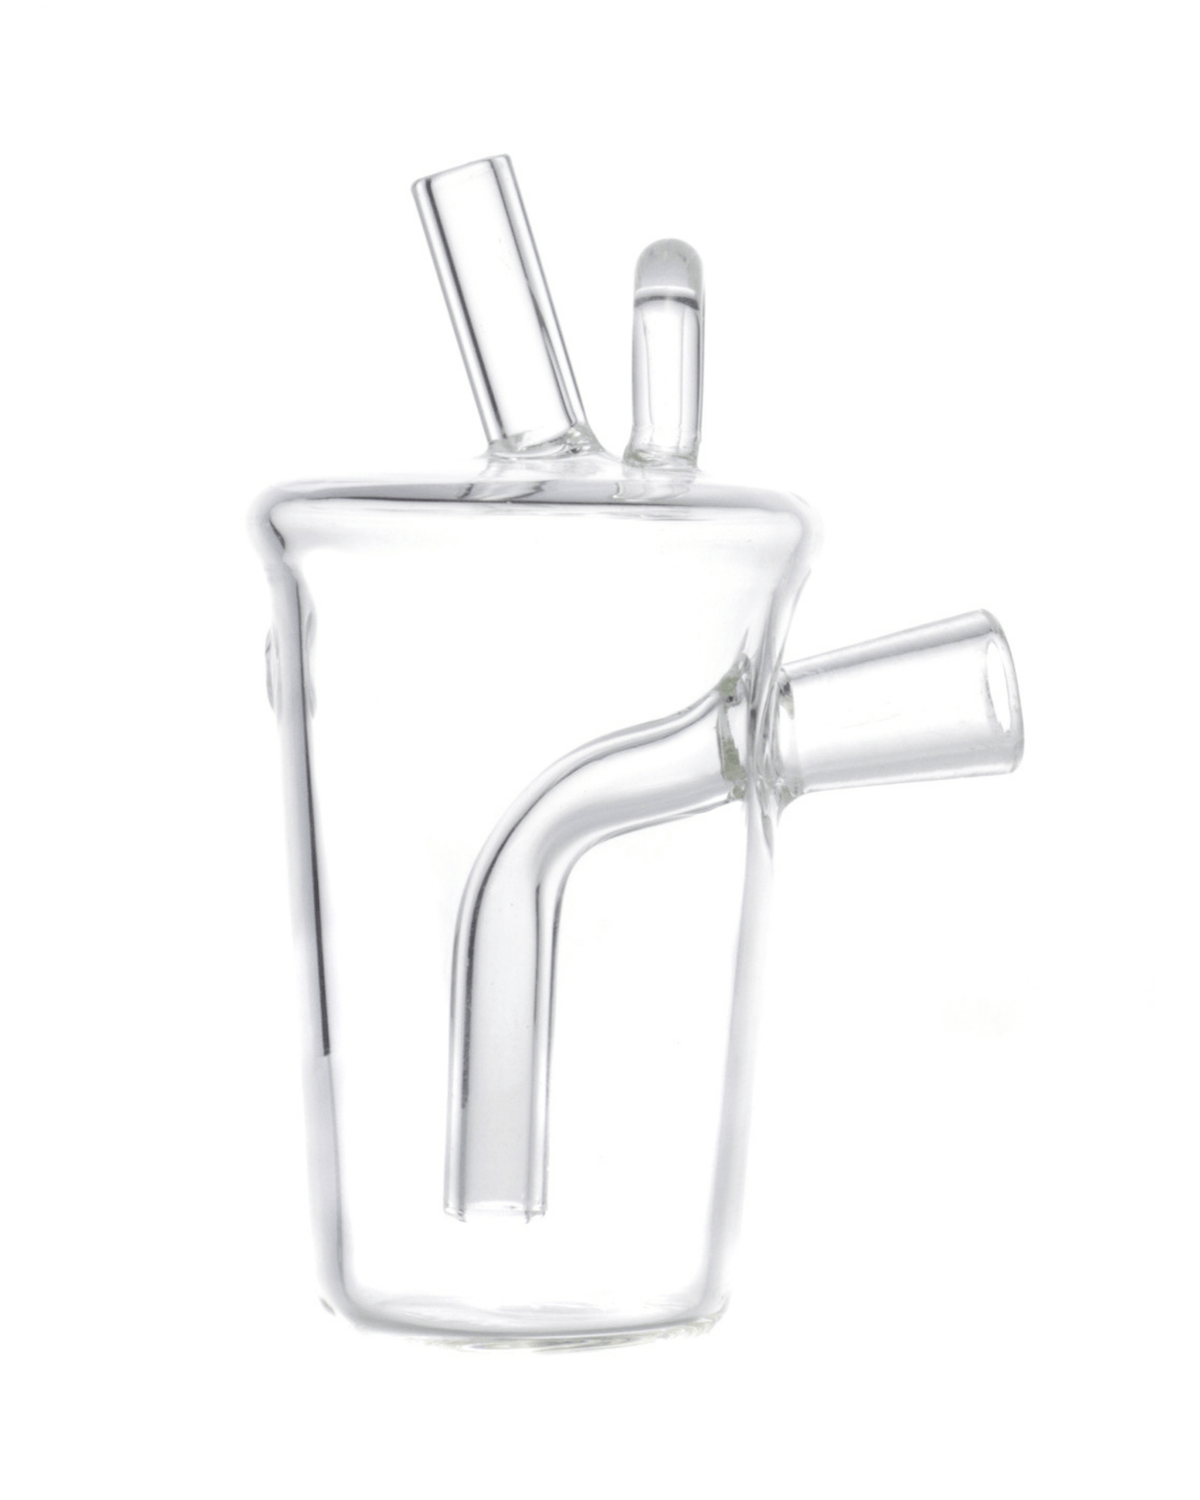 Small Cup Bubbler